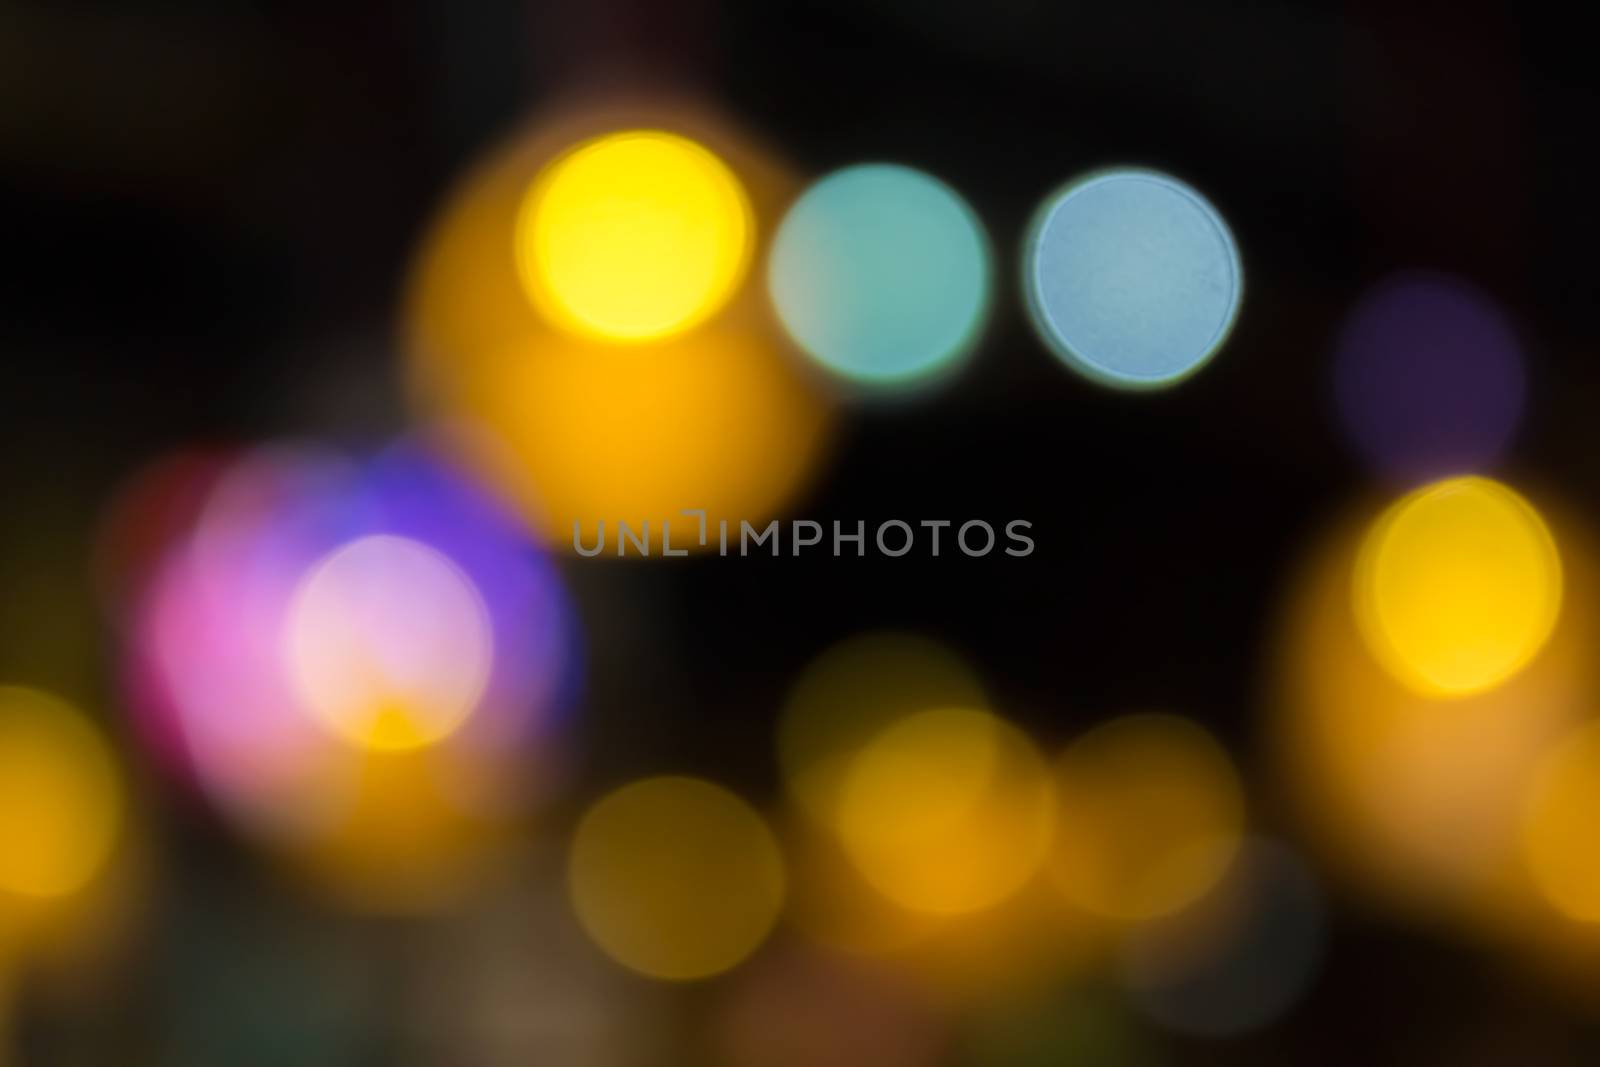 abstract background of blurred warm 
lights with cool blue and purple spots with bokeh effect